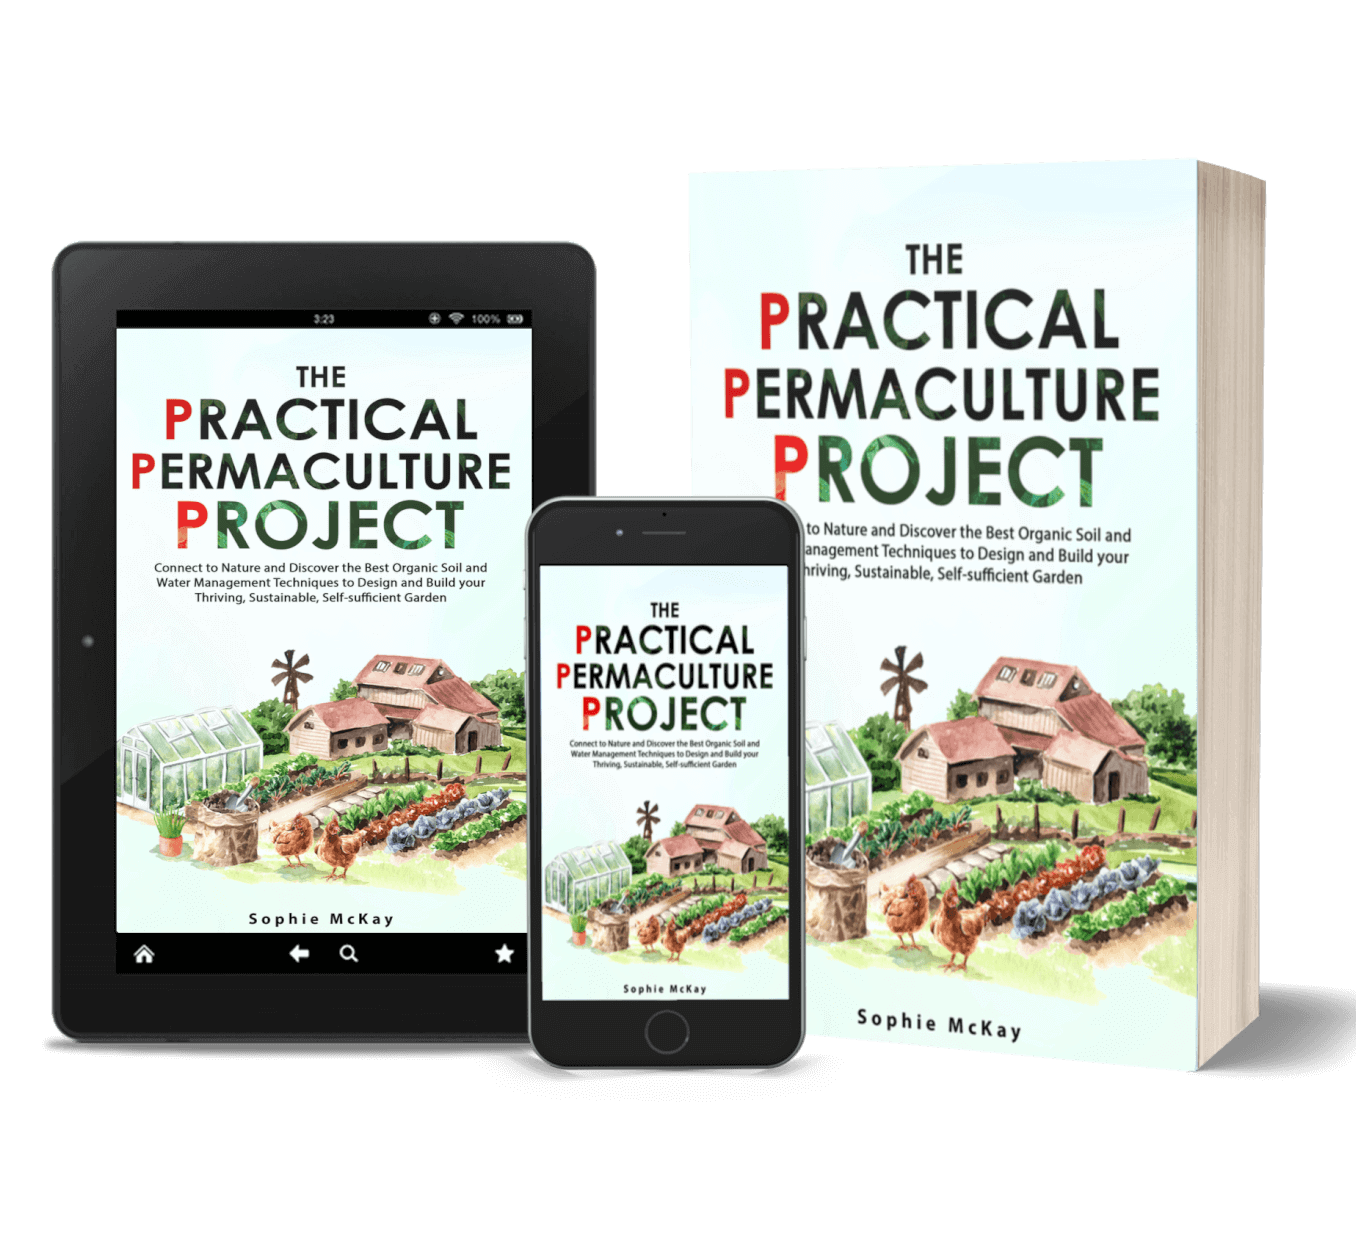 Sophie McKay - The Practical Permaculture Project